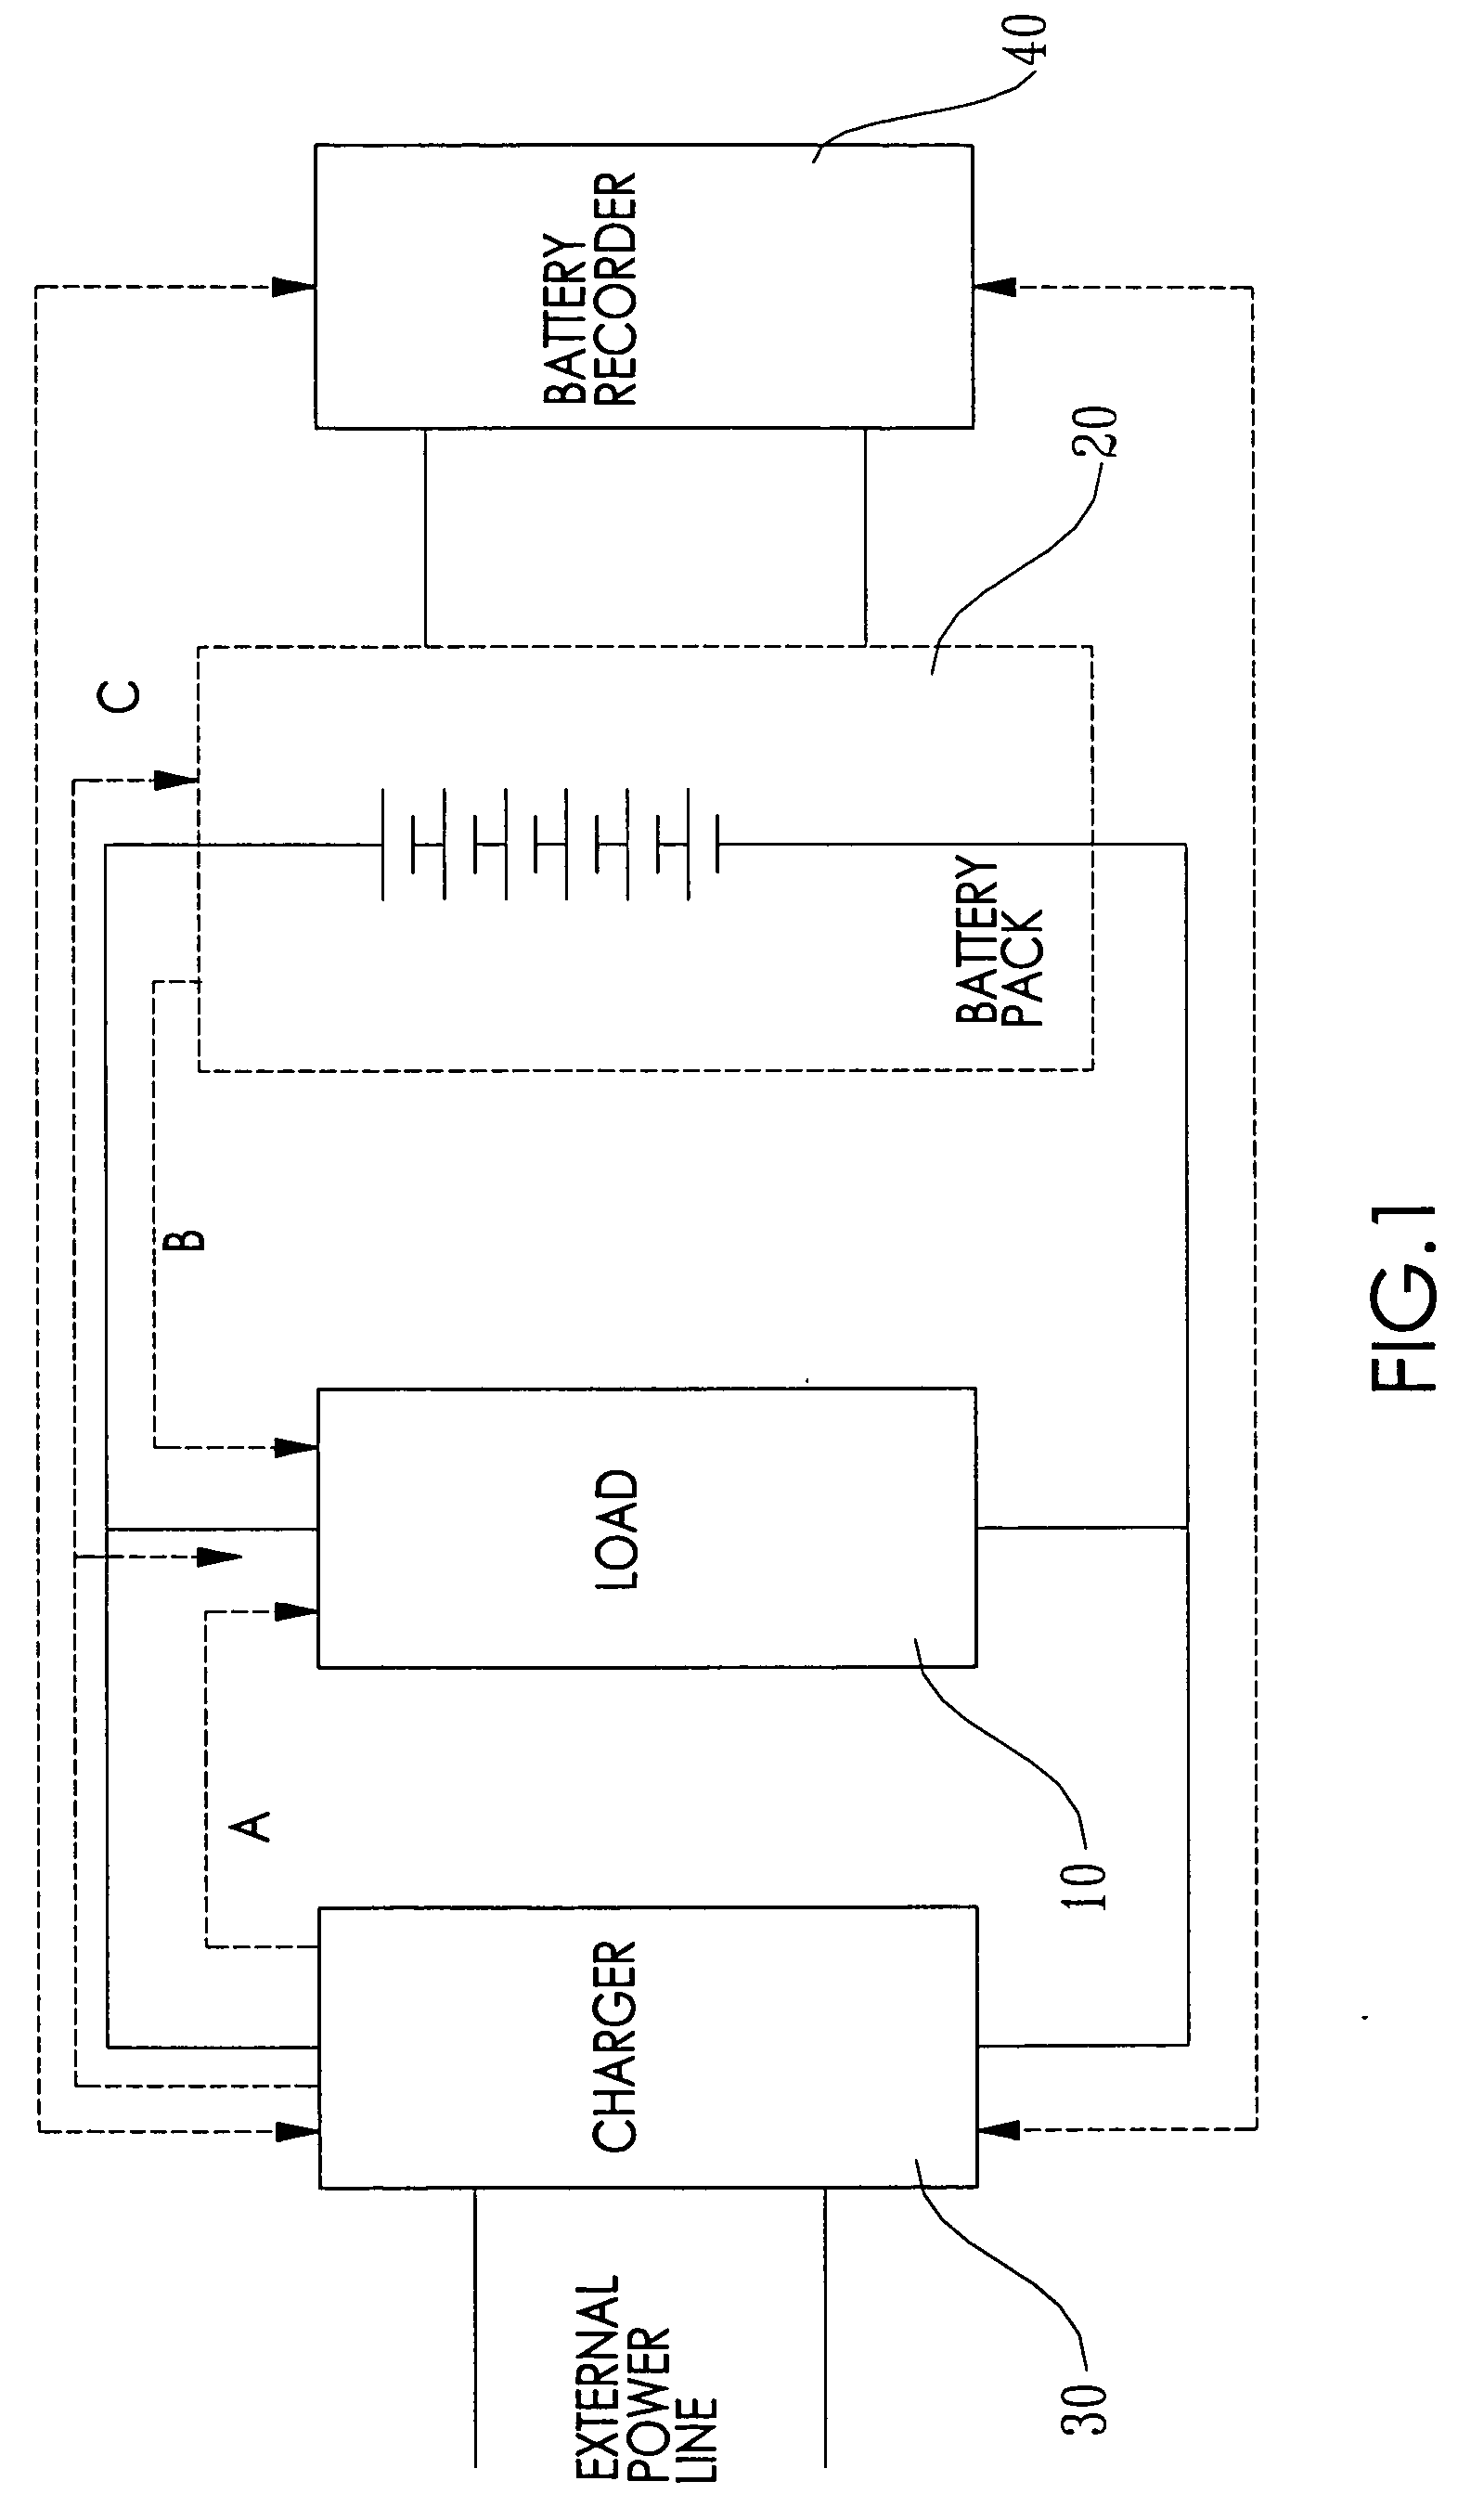 Method of testing a battery pack by purposeful charge/discharge operations